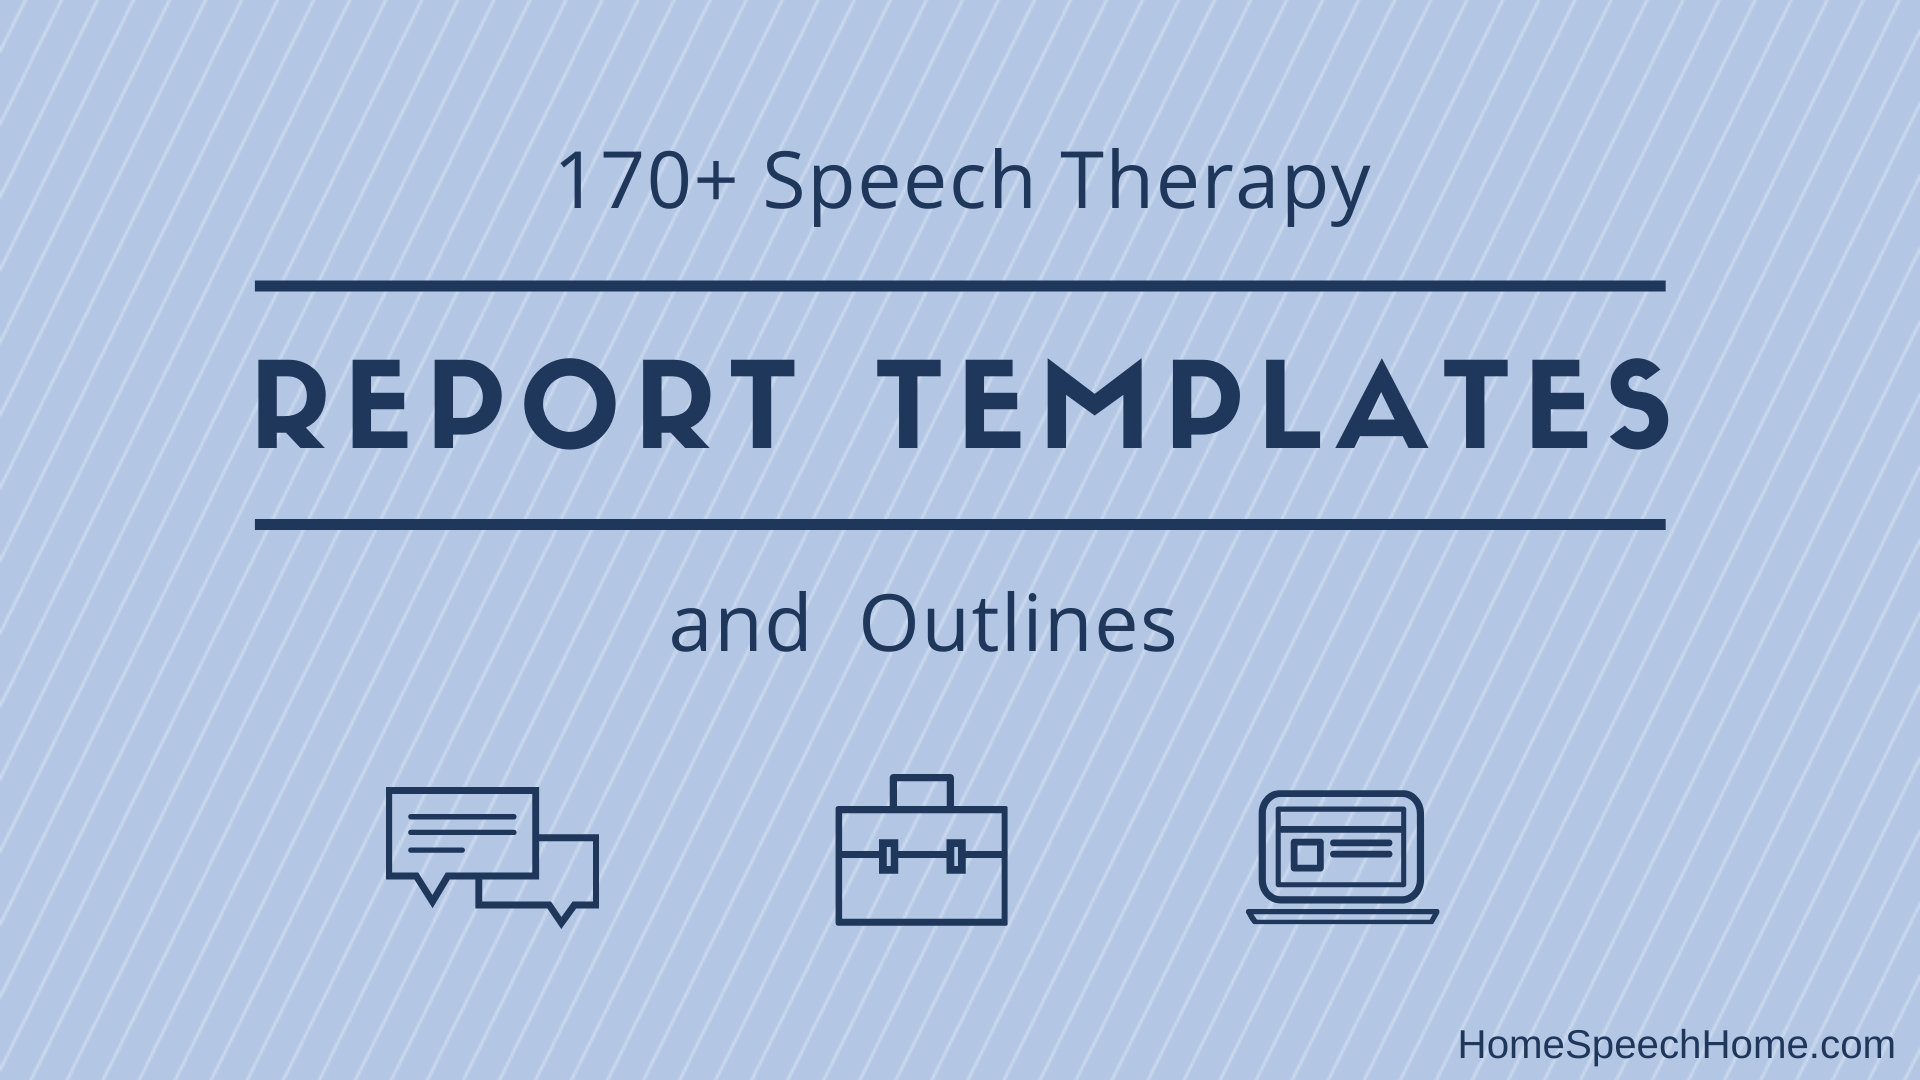 10+ Speech Therapy Report Templates at Your Fingertips With Regard To Speech And Language Report Template